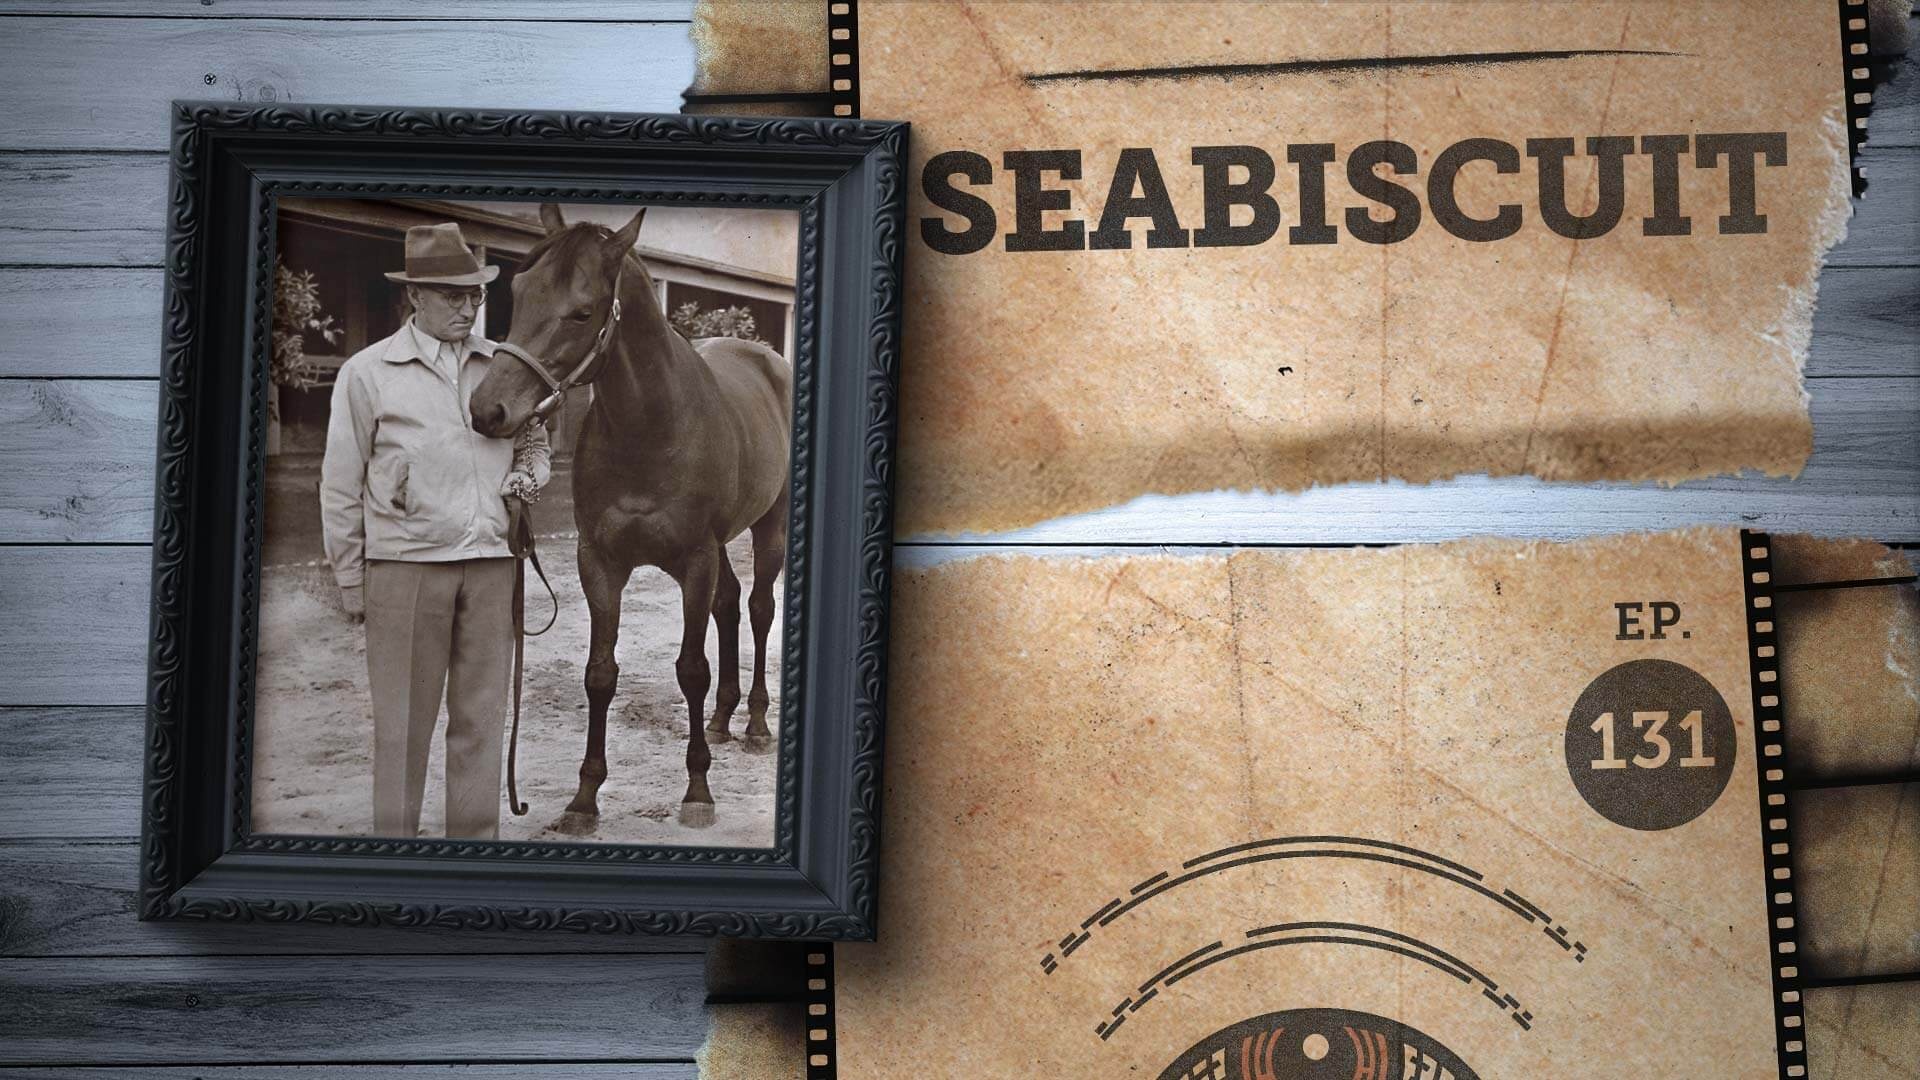 Seabiscuit, The movie, True, Horses in the morning, 1920x1080 Full HD Desktop